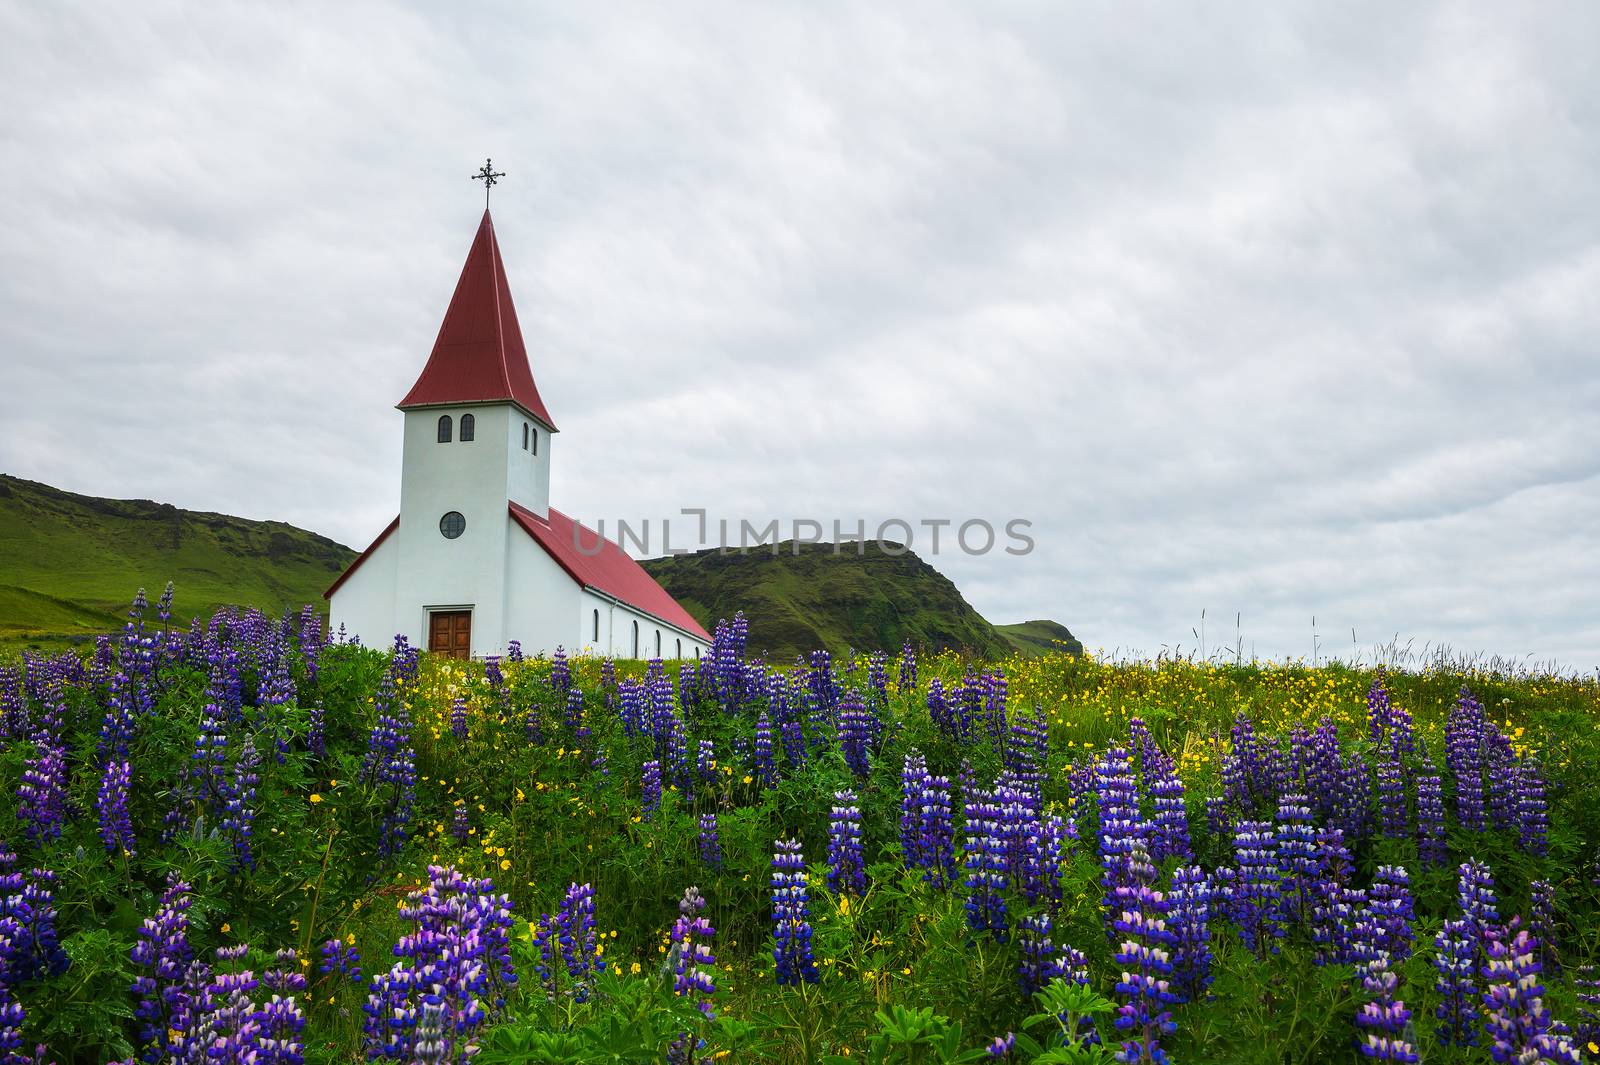 Vikurkirkja christian church surrounded with blooming lupine flowers in the town of Vik i Myrdal, Iceland.